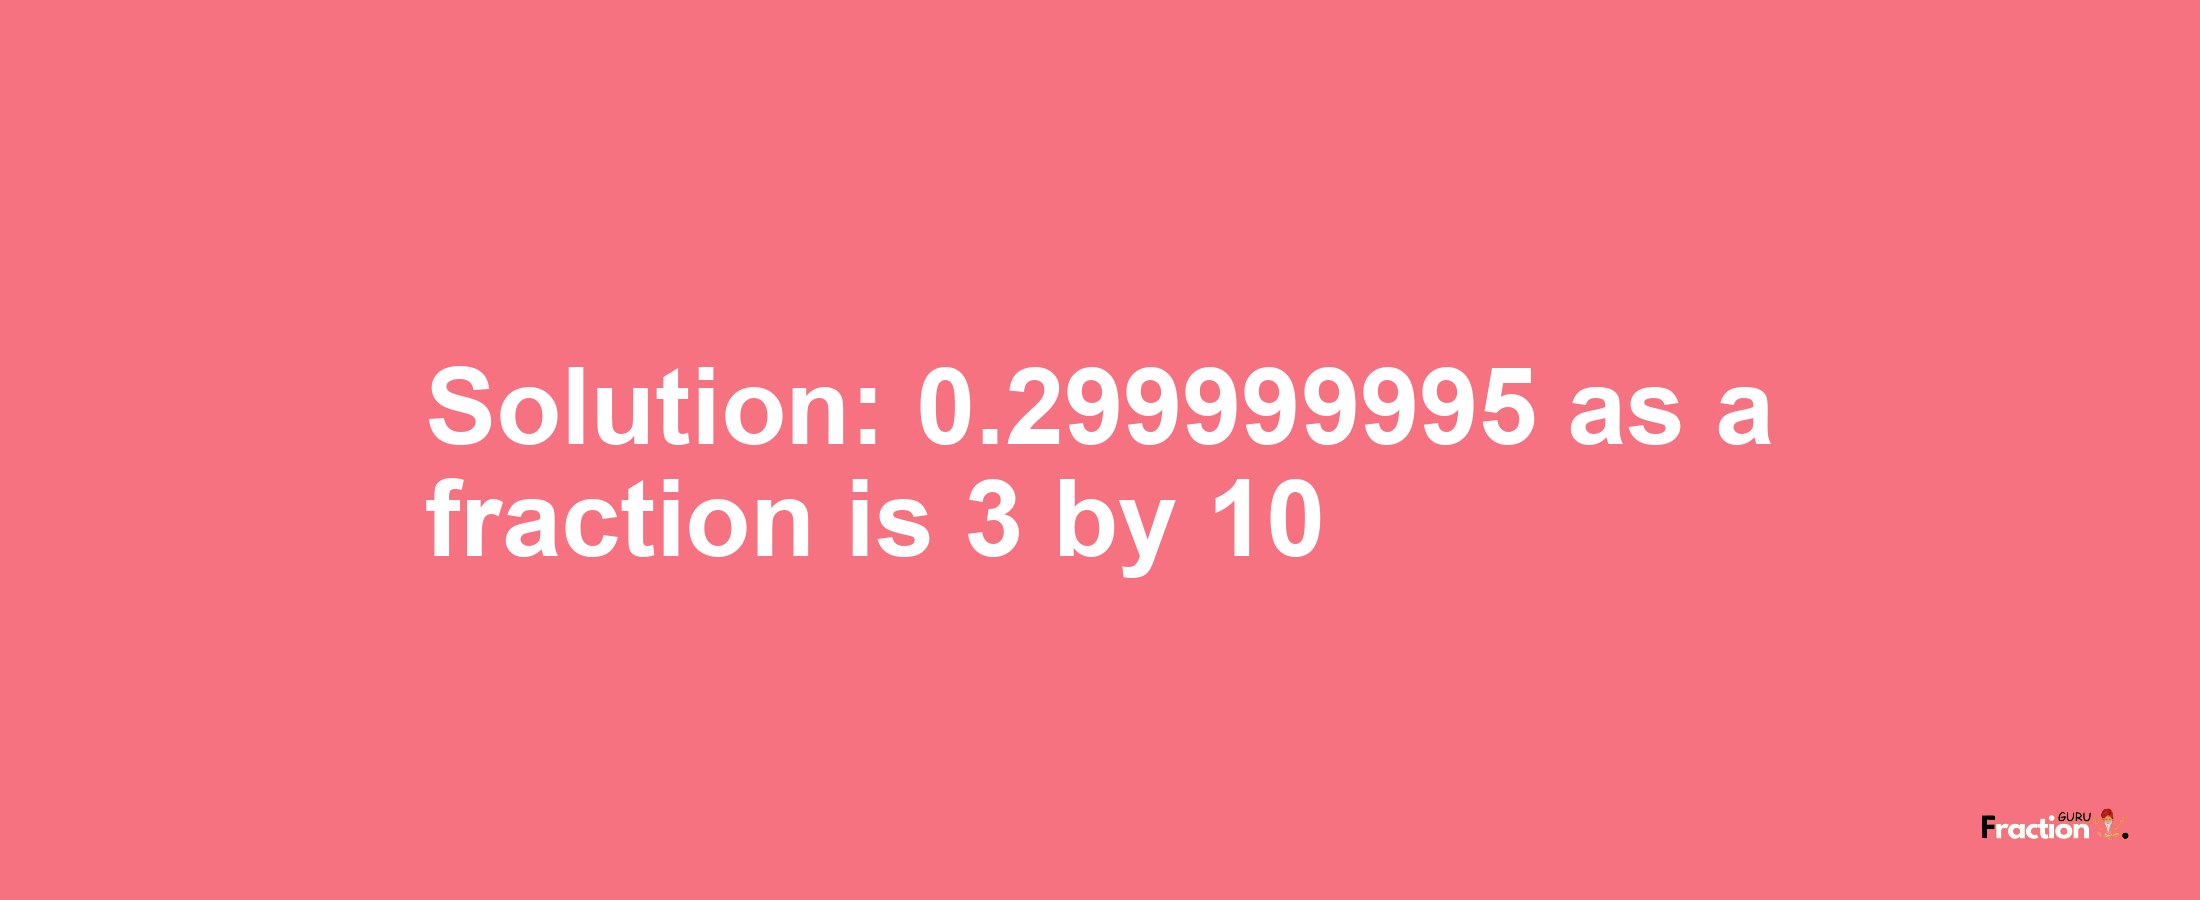 Solution:0.299999995 as a fraction is 3/10